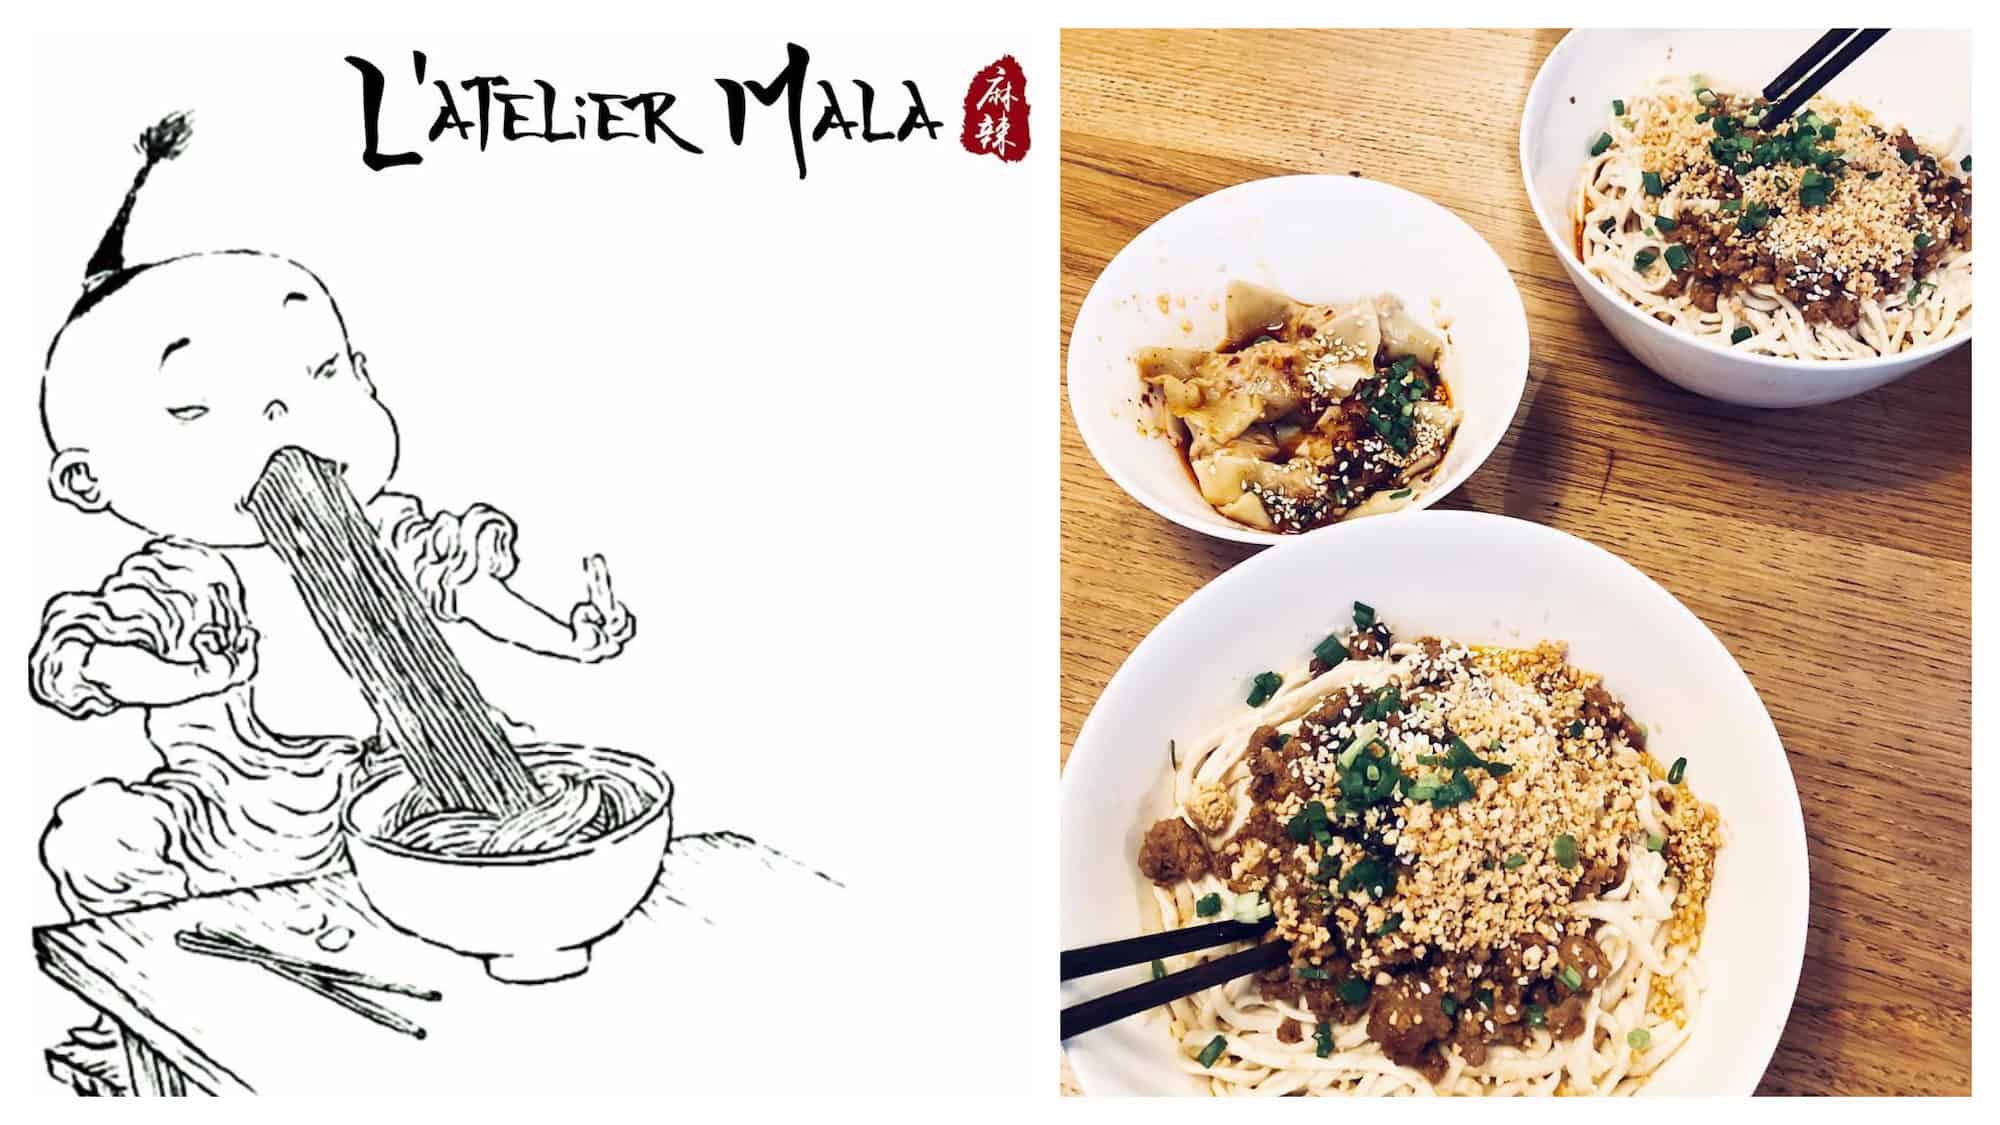 Go to L'Atelier Mala restaurant for the best authentic Chinese food in Paris, like tasty noodles, as in the restaurant's poster of a little cartoon Chinese boy hoovering up noodles (left) and tangy raviolis (right).